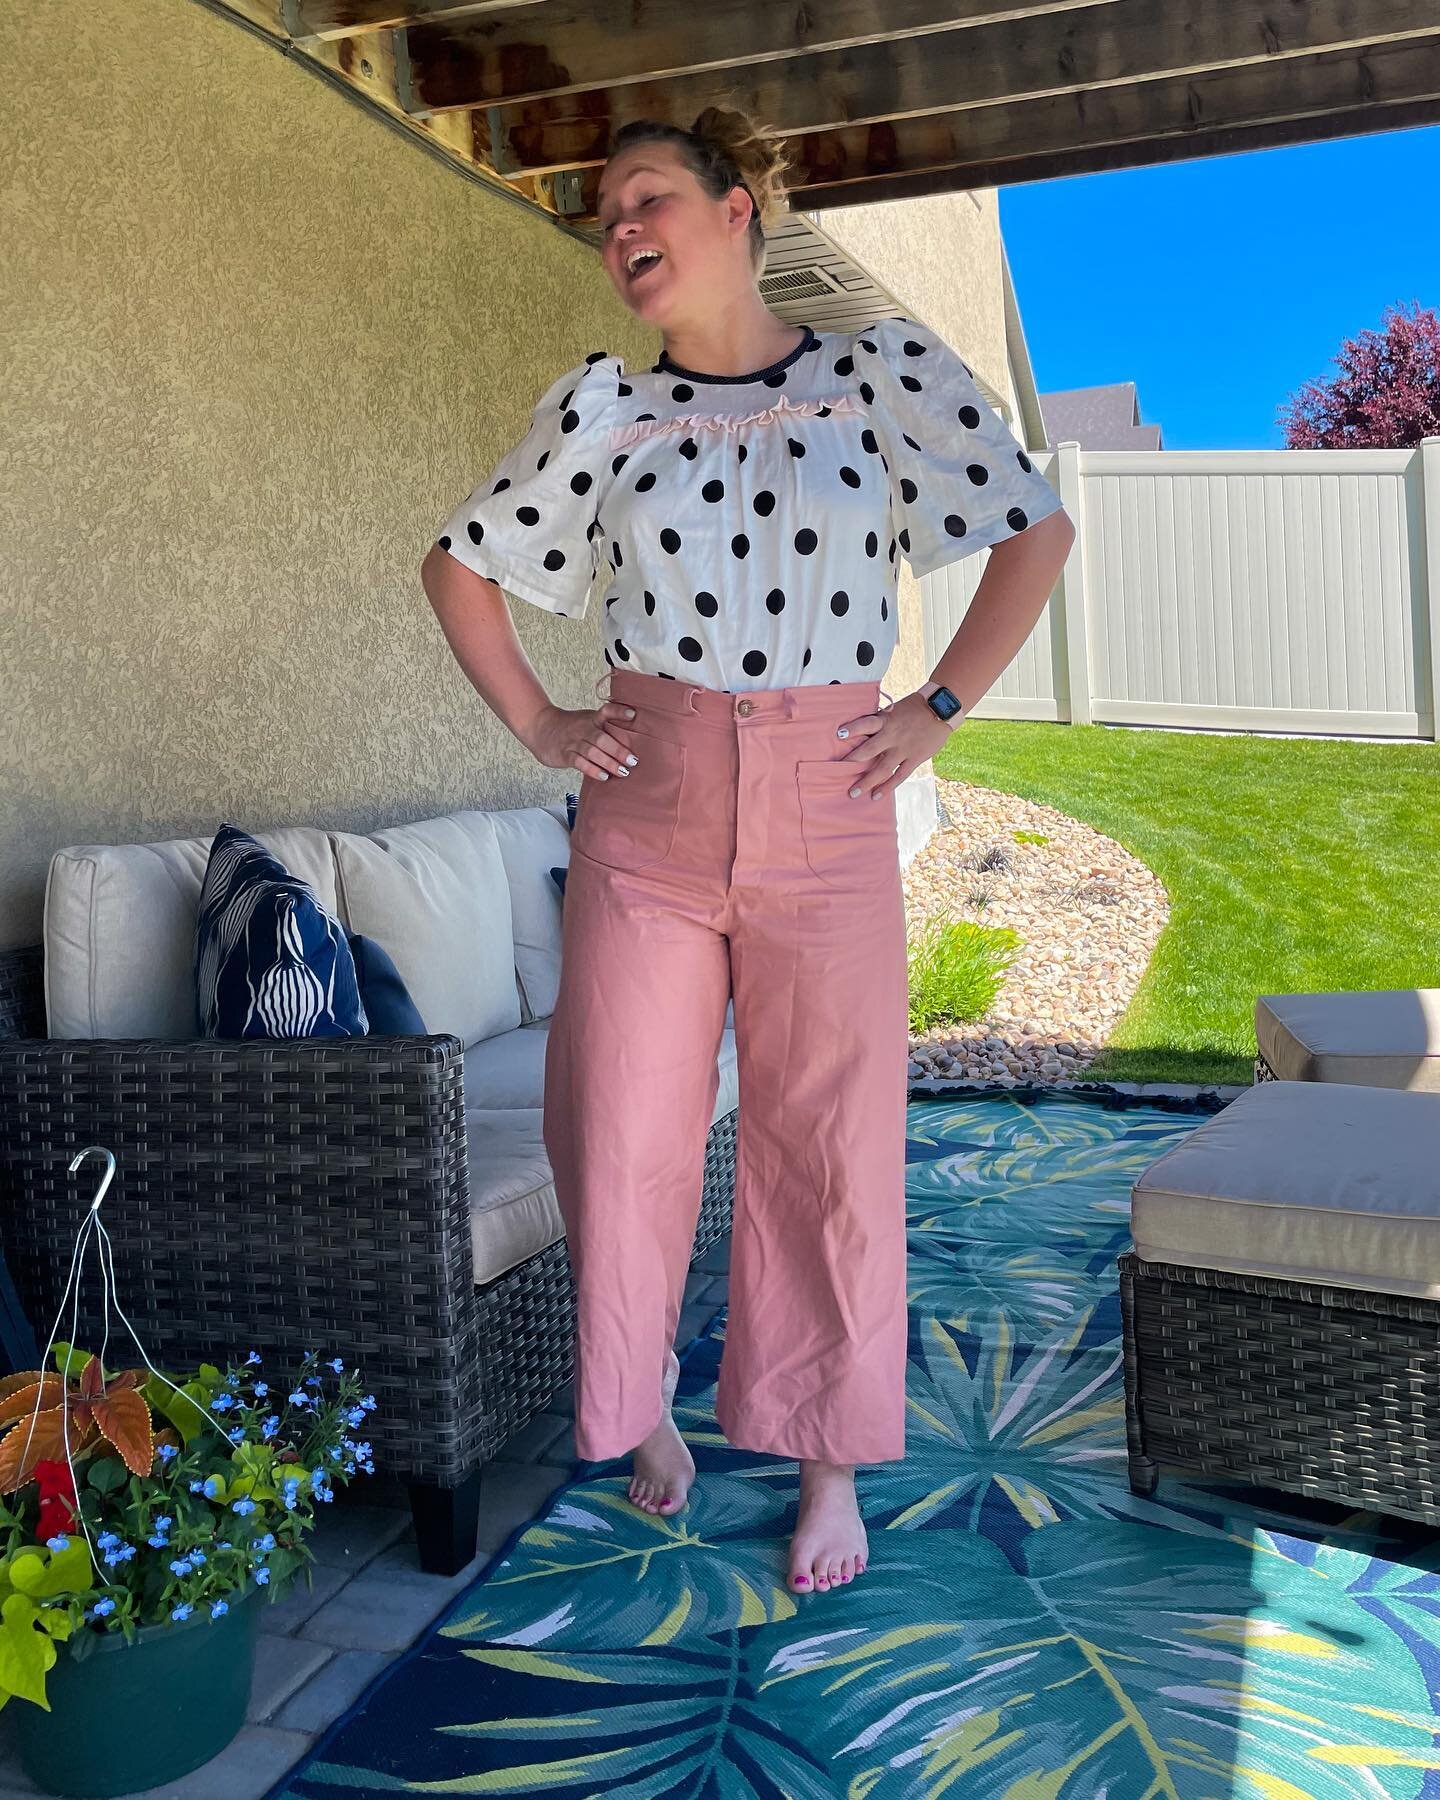 #memademay2021 Day 27 y&rsquo;all!!

Let the Summer begin!! This is how you will likely find me 90% of the time this Summer; wrinkled pants and top, hair in a bun, no make-up and barefoot... and since I got a new patio set for my birthday, I will pro